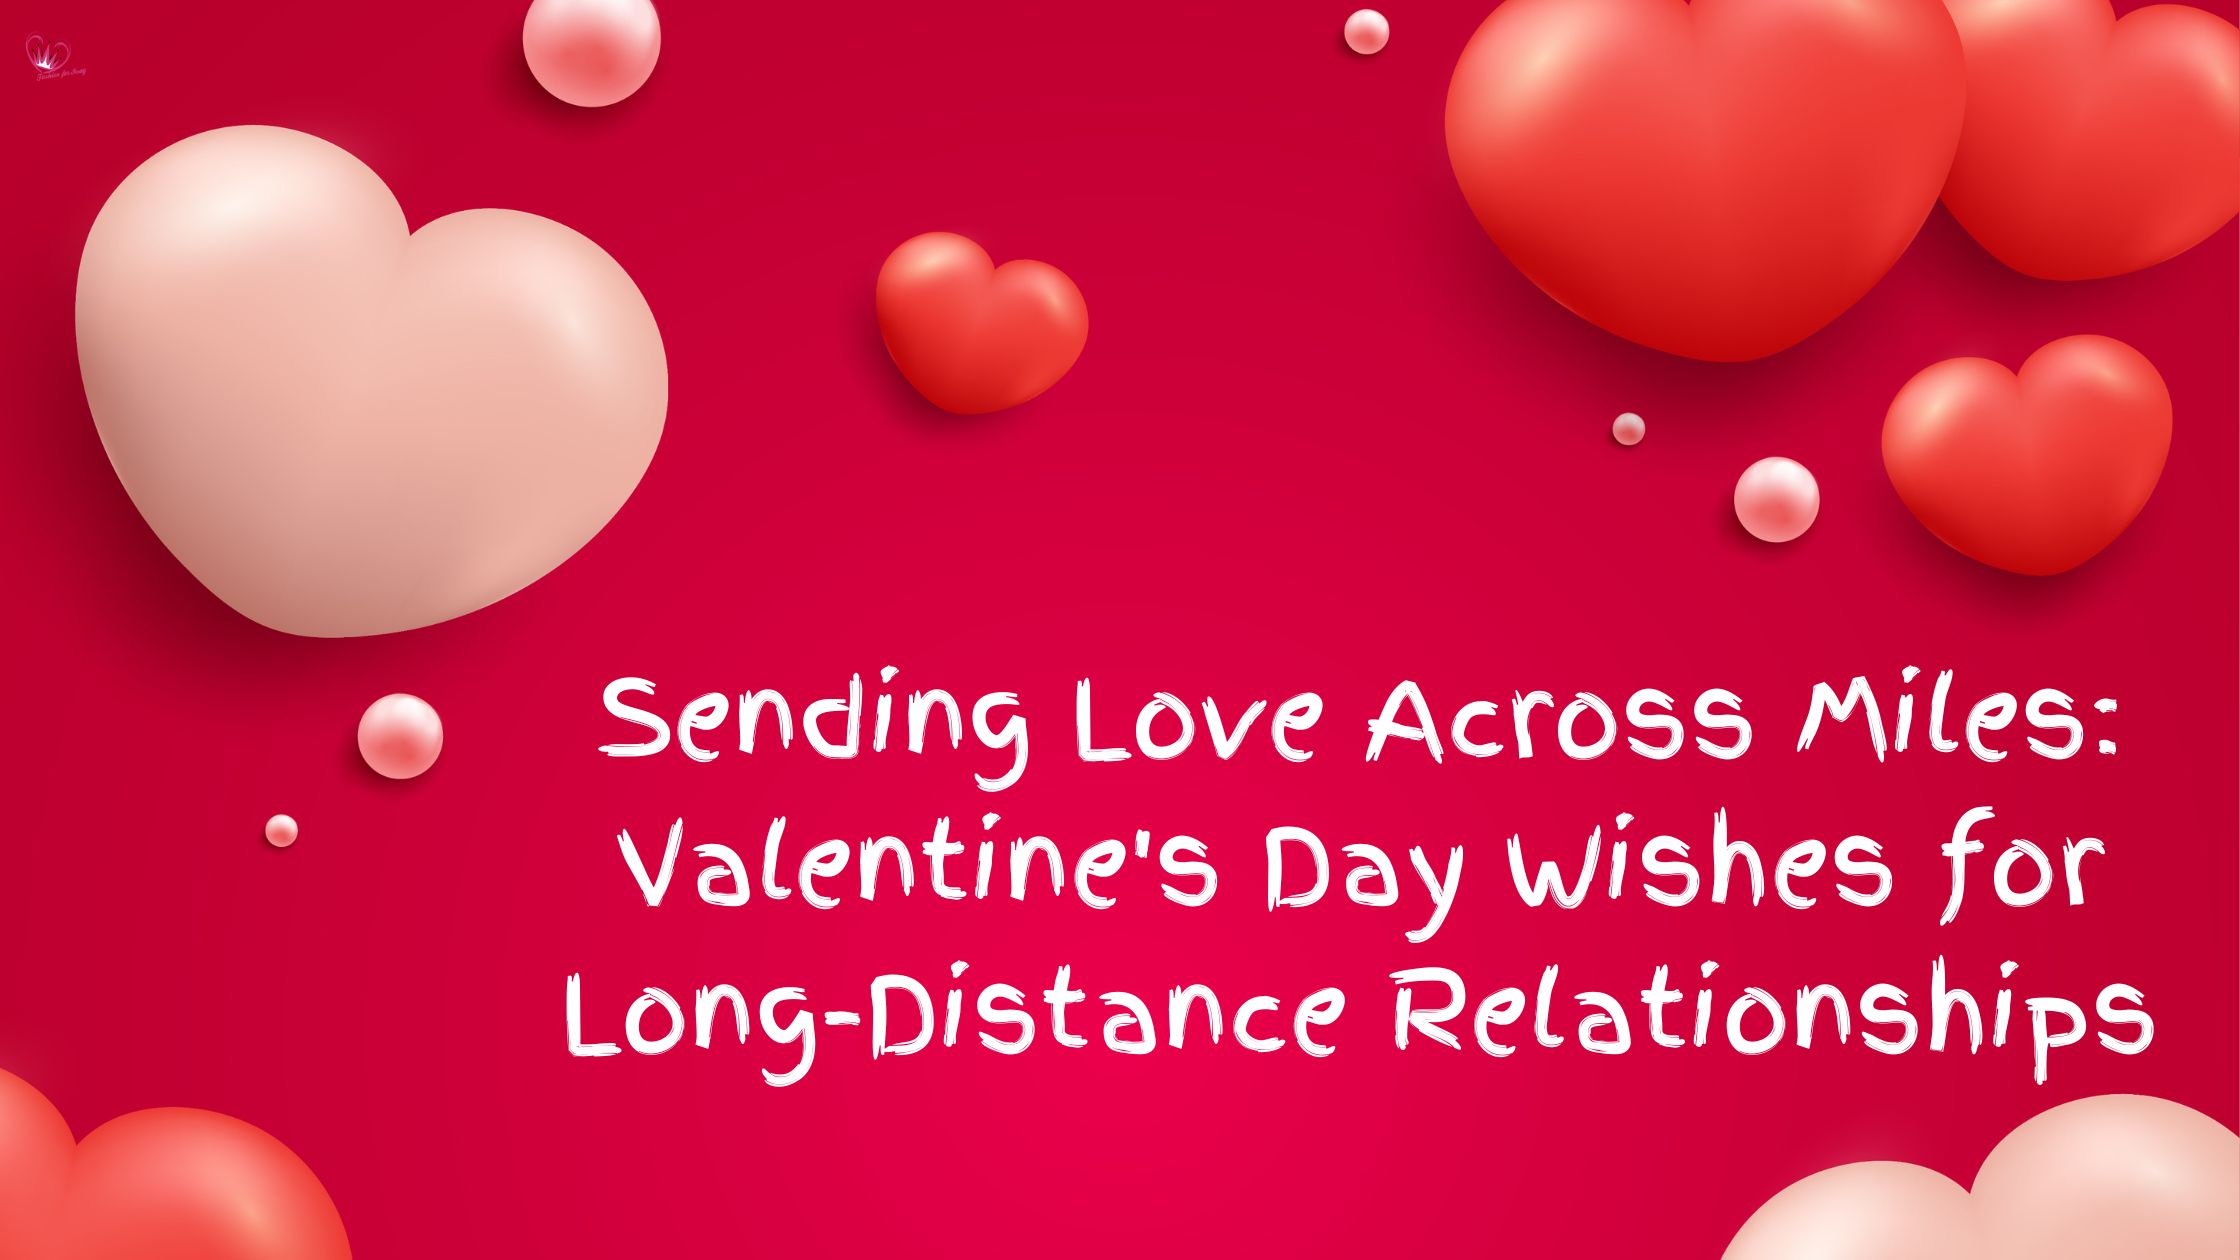 Sending Love Across Miles: Valentine’s Day Wishes for Long-Distance Relationships